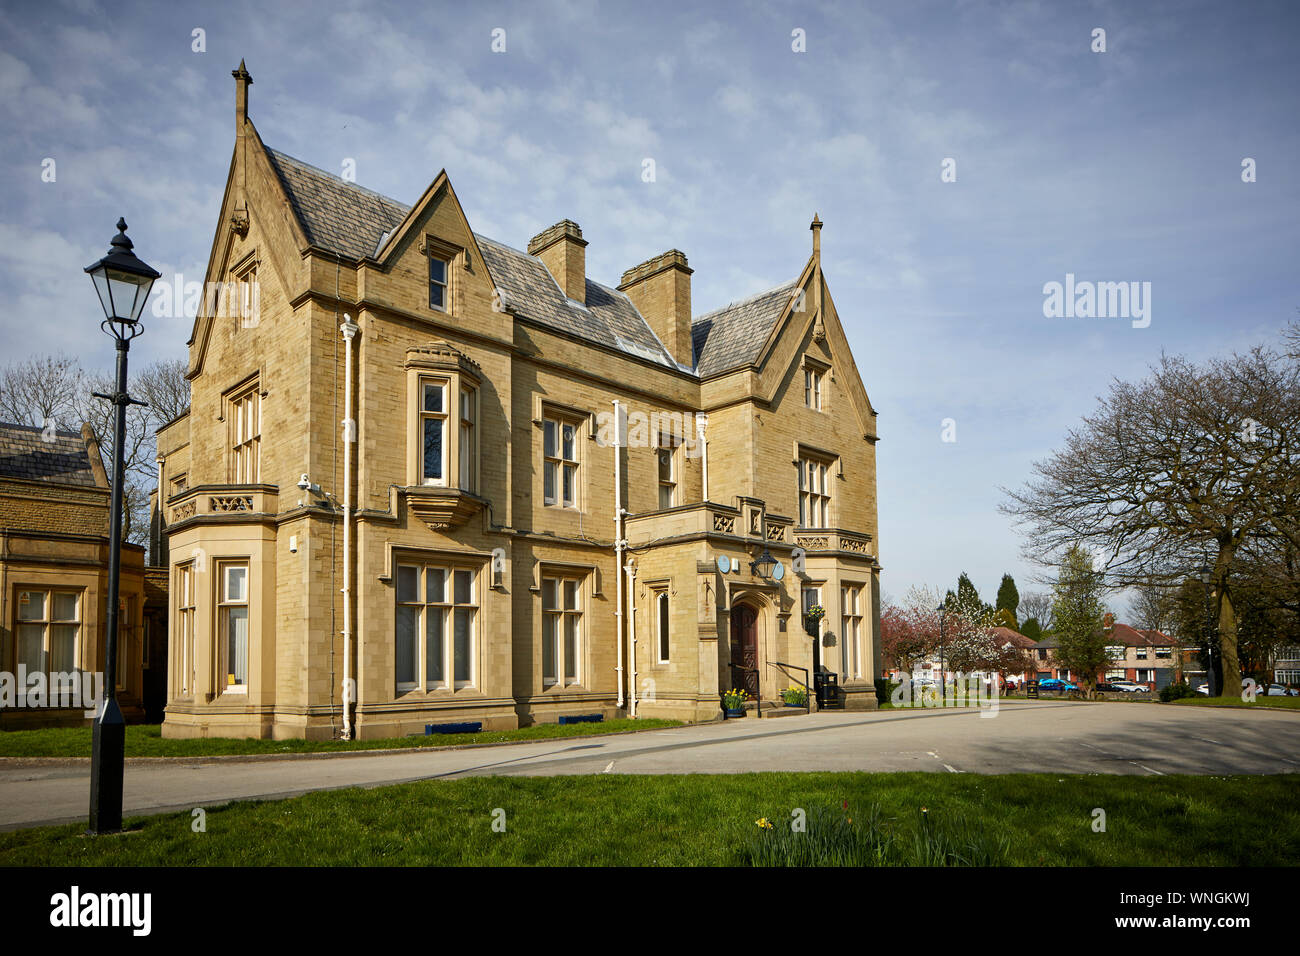 Tameside Ryecroft Hall Manchester Rd, Audenshaw, beautiful Grade II listed civic building donated to the people of Audenshaw by Austin Hopkinson in 19 Stock Photo